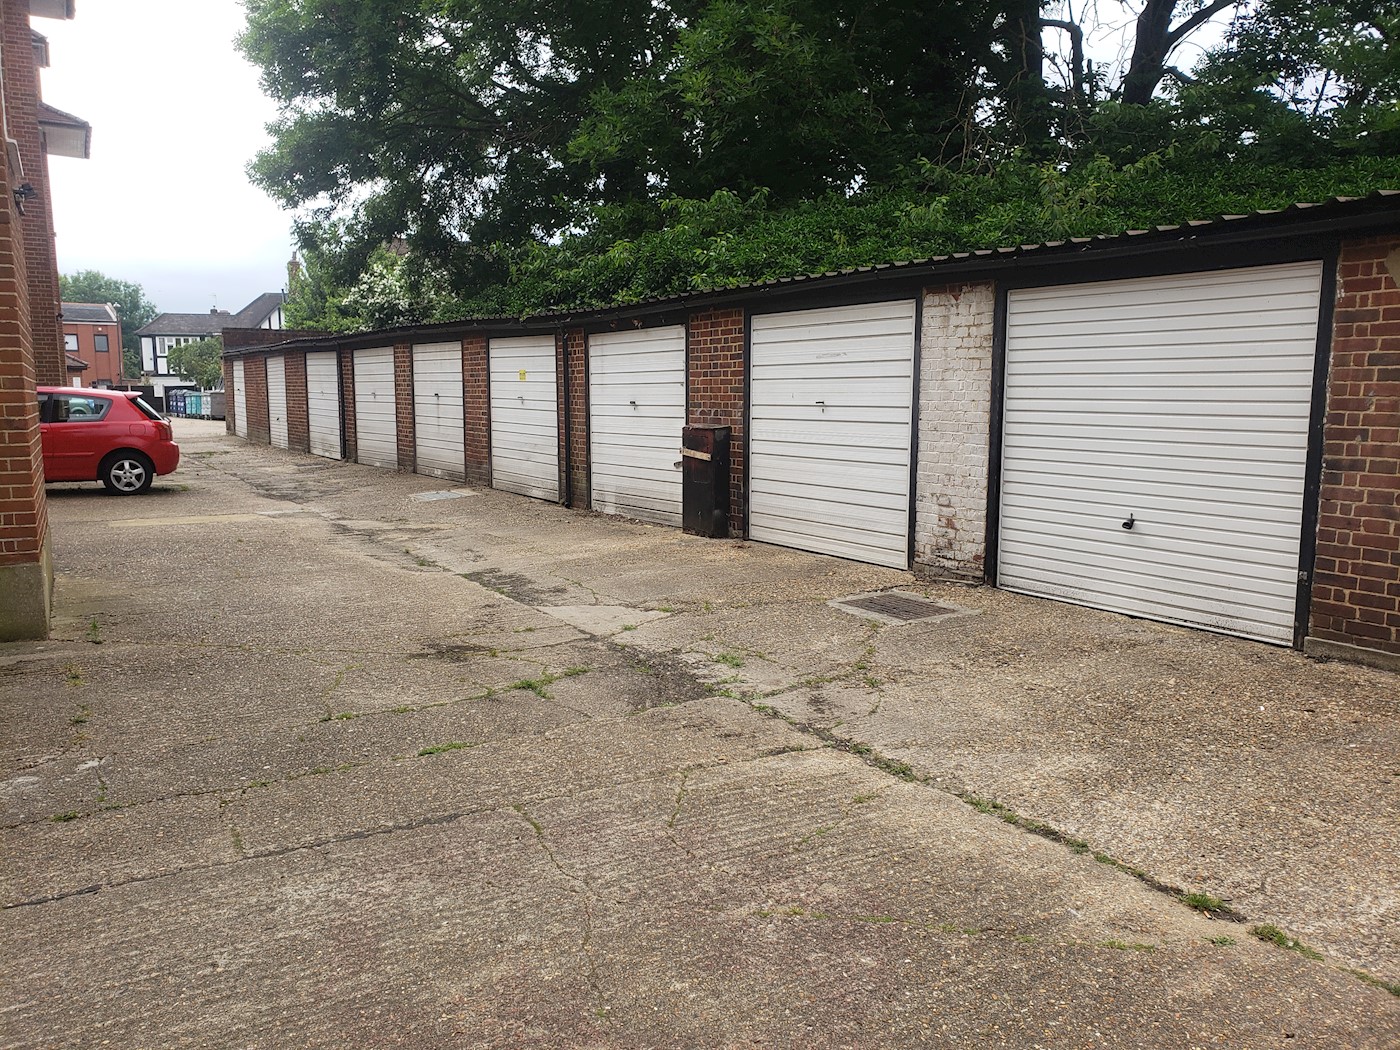 Garages 1-14 at Imperial Court, Imperial Drive, Harrow, HA2 7HU 1/3